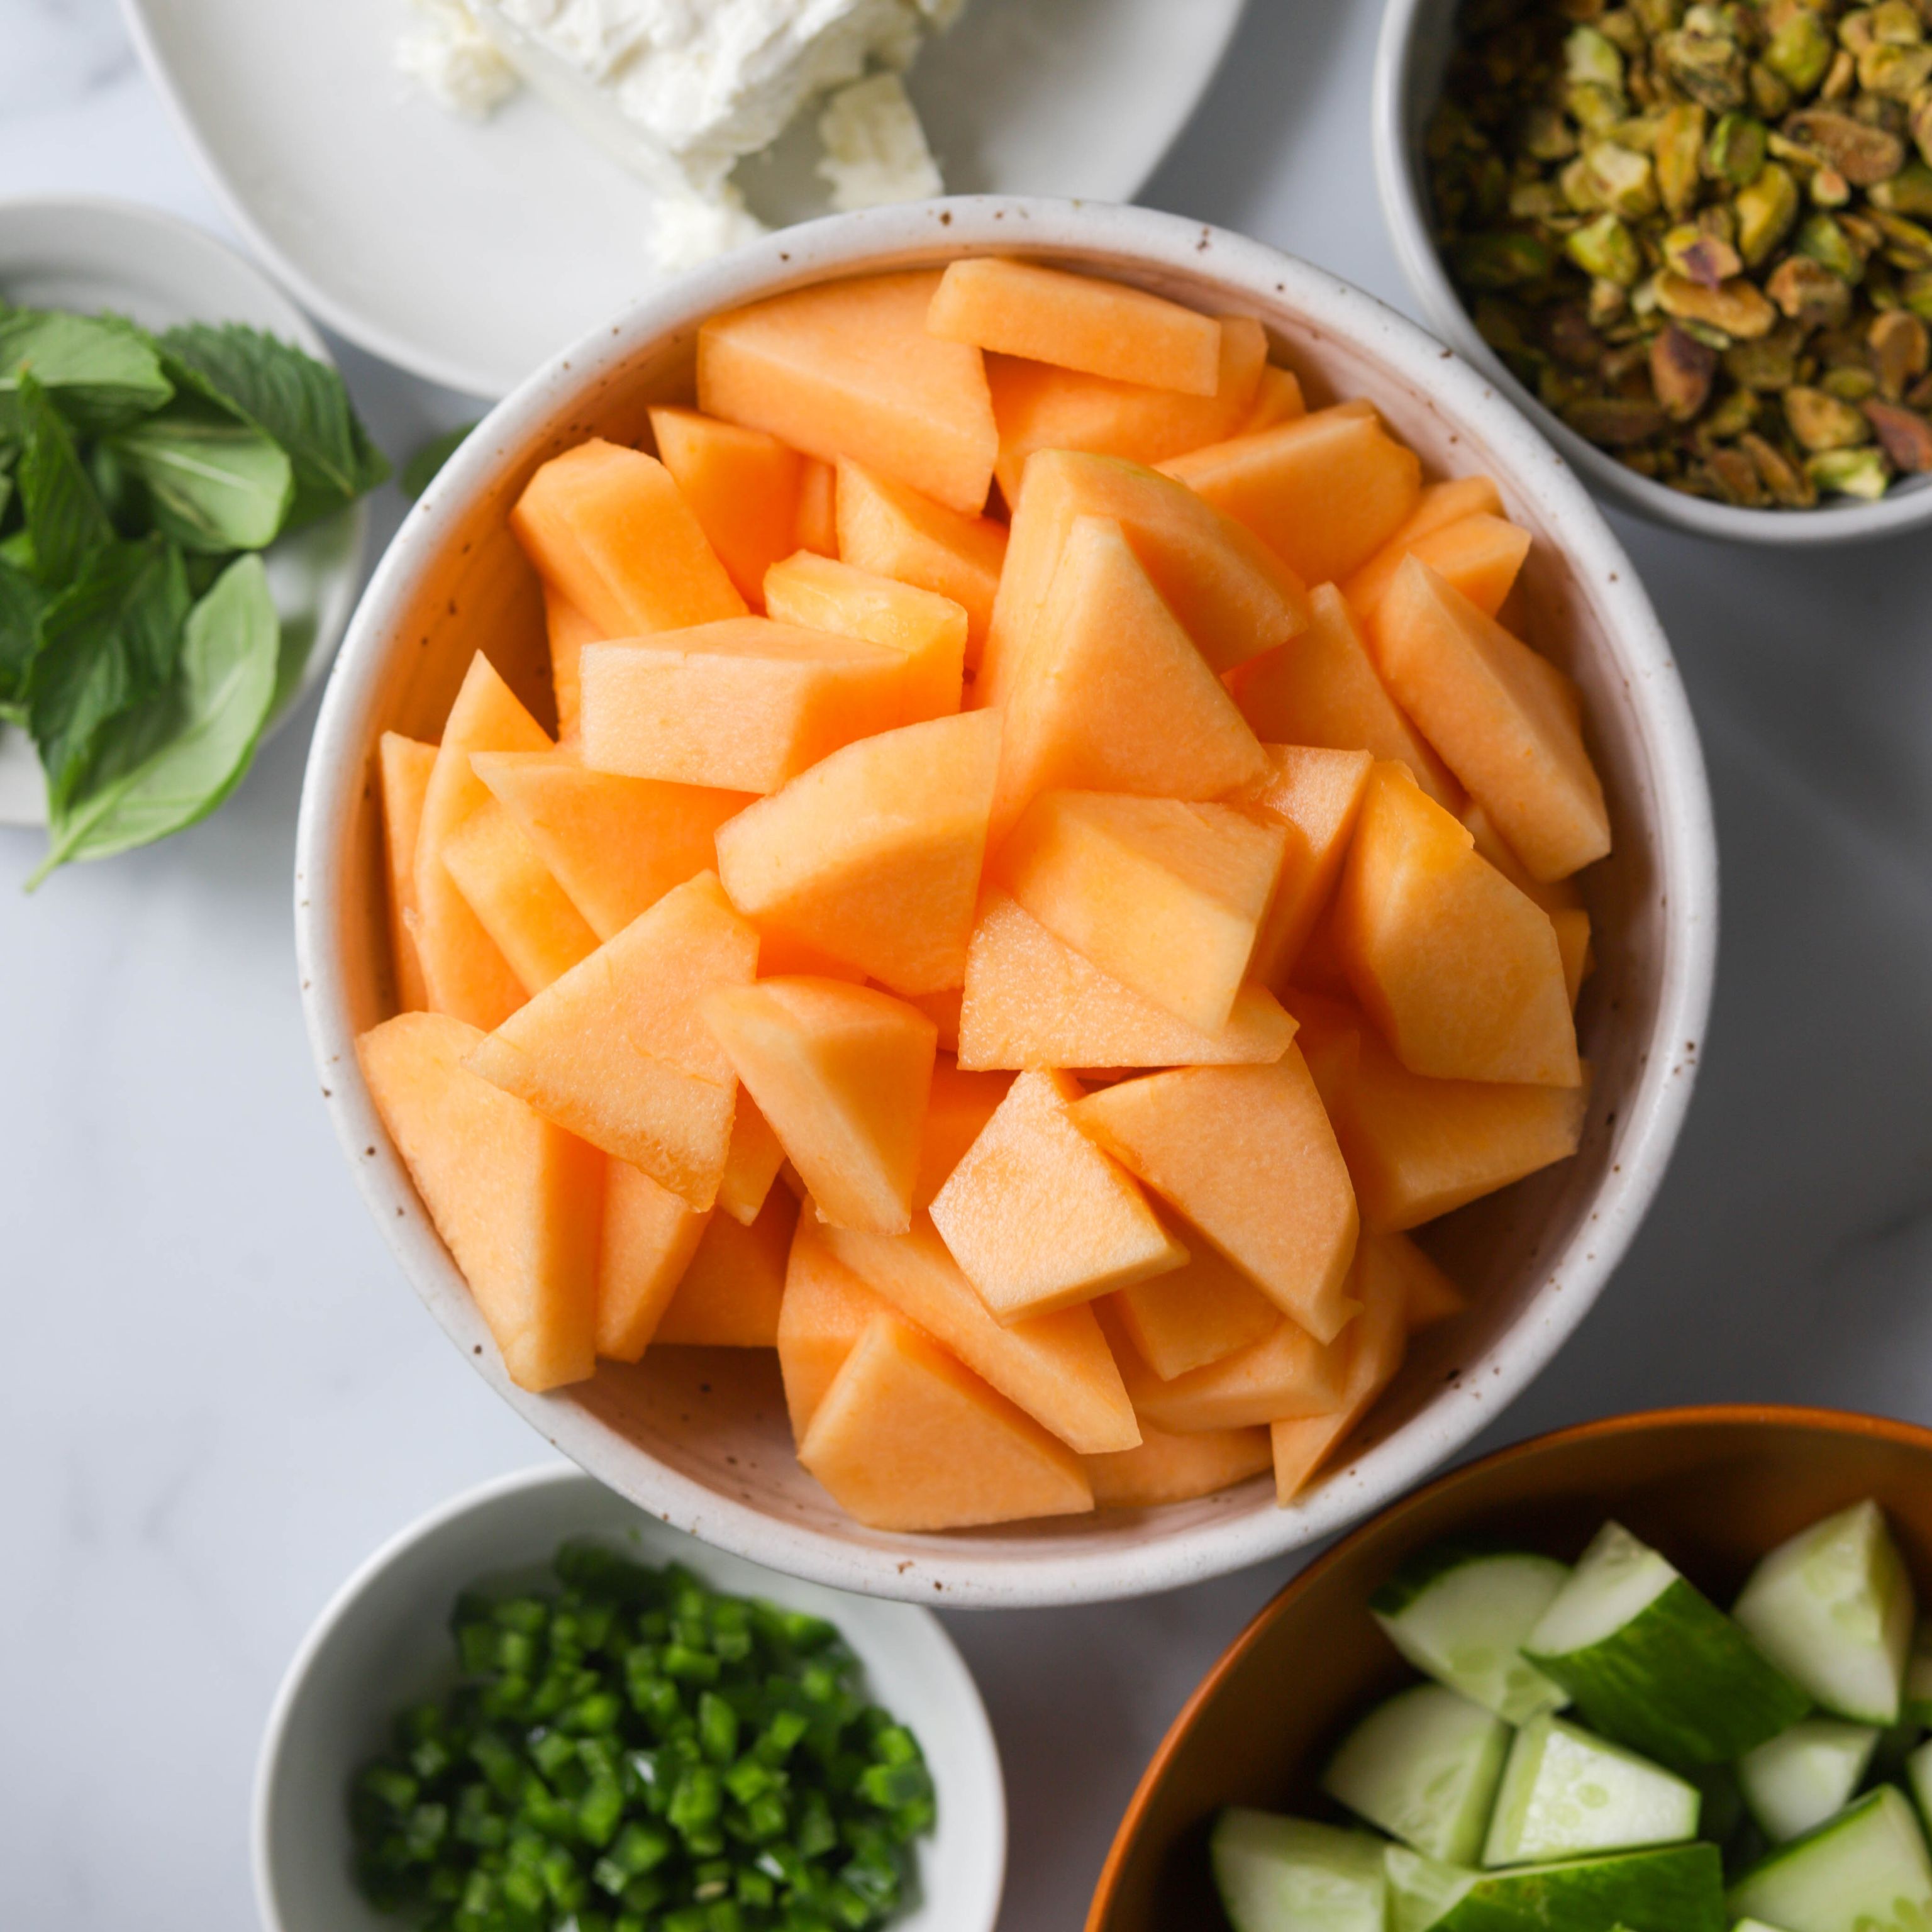 Salad ingredients for California Cantaloupes